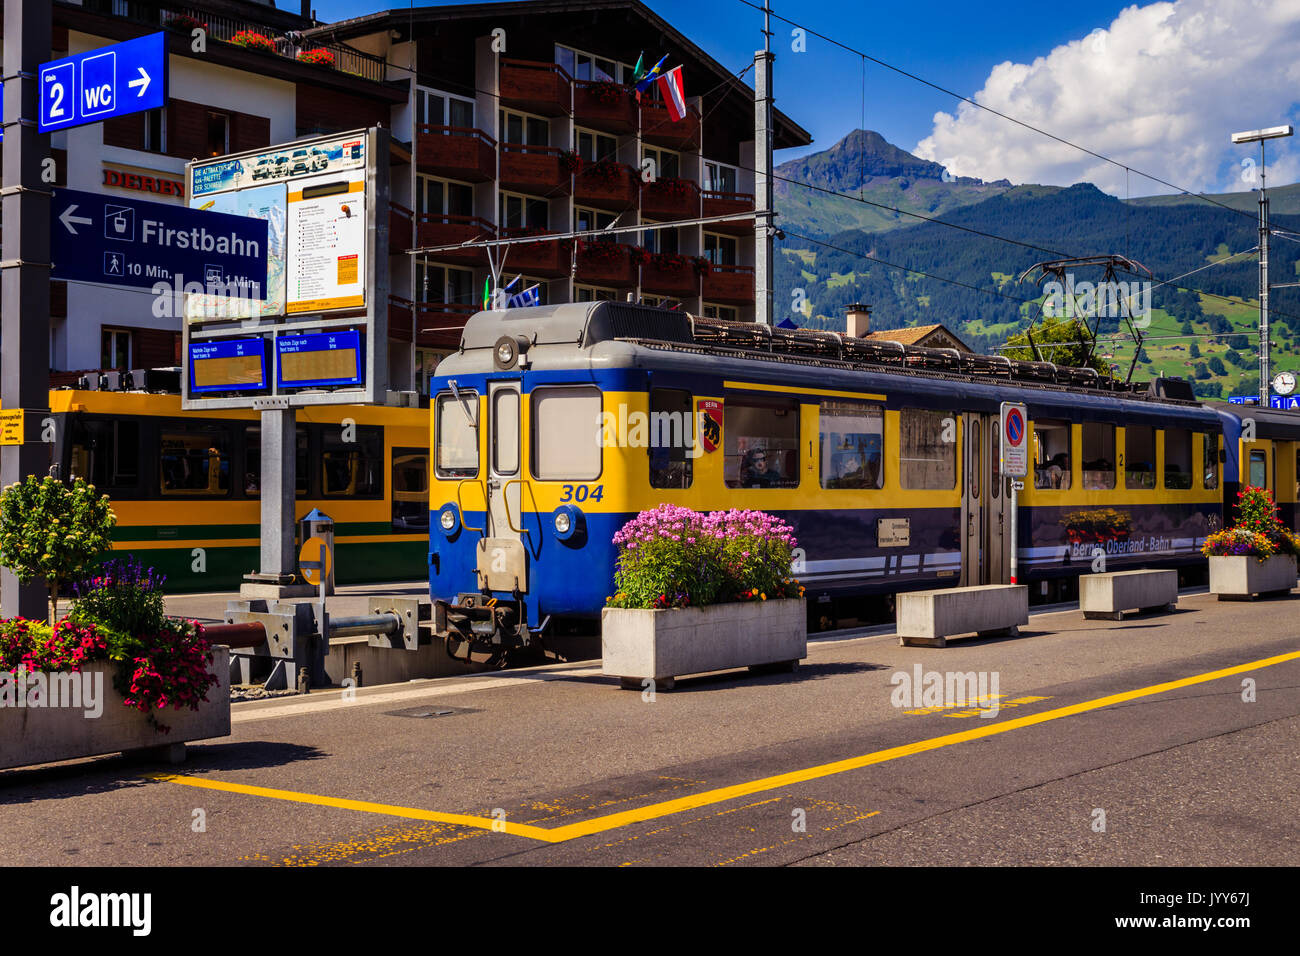 Grindelwald, Bernese Oberland, Switzerland - AUGUST 1, 2017 : Yellow - Blue train from the Berner Oberland-Bahn to Interlaken in the Grindelwald railw Stock Photo